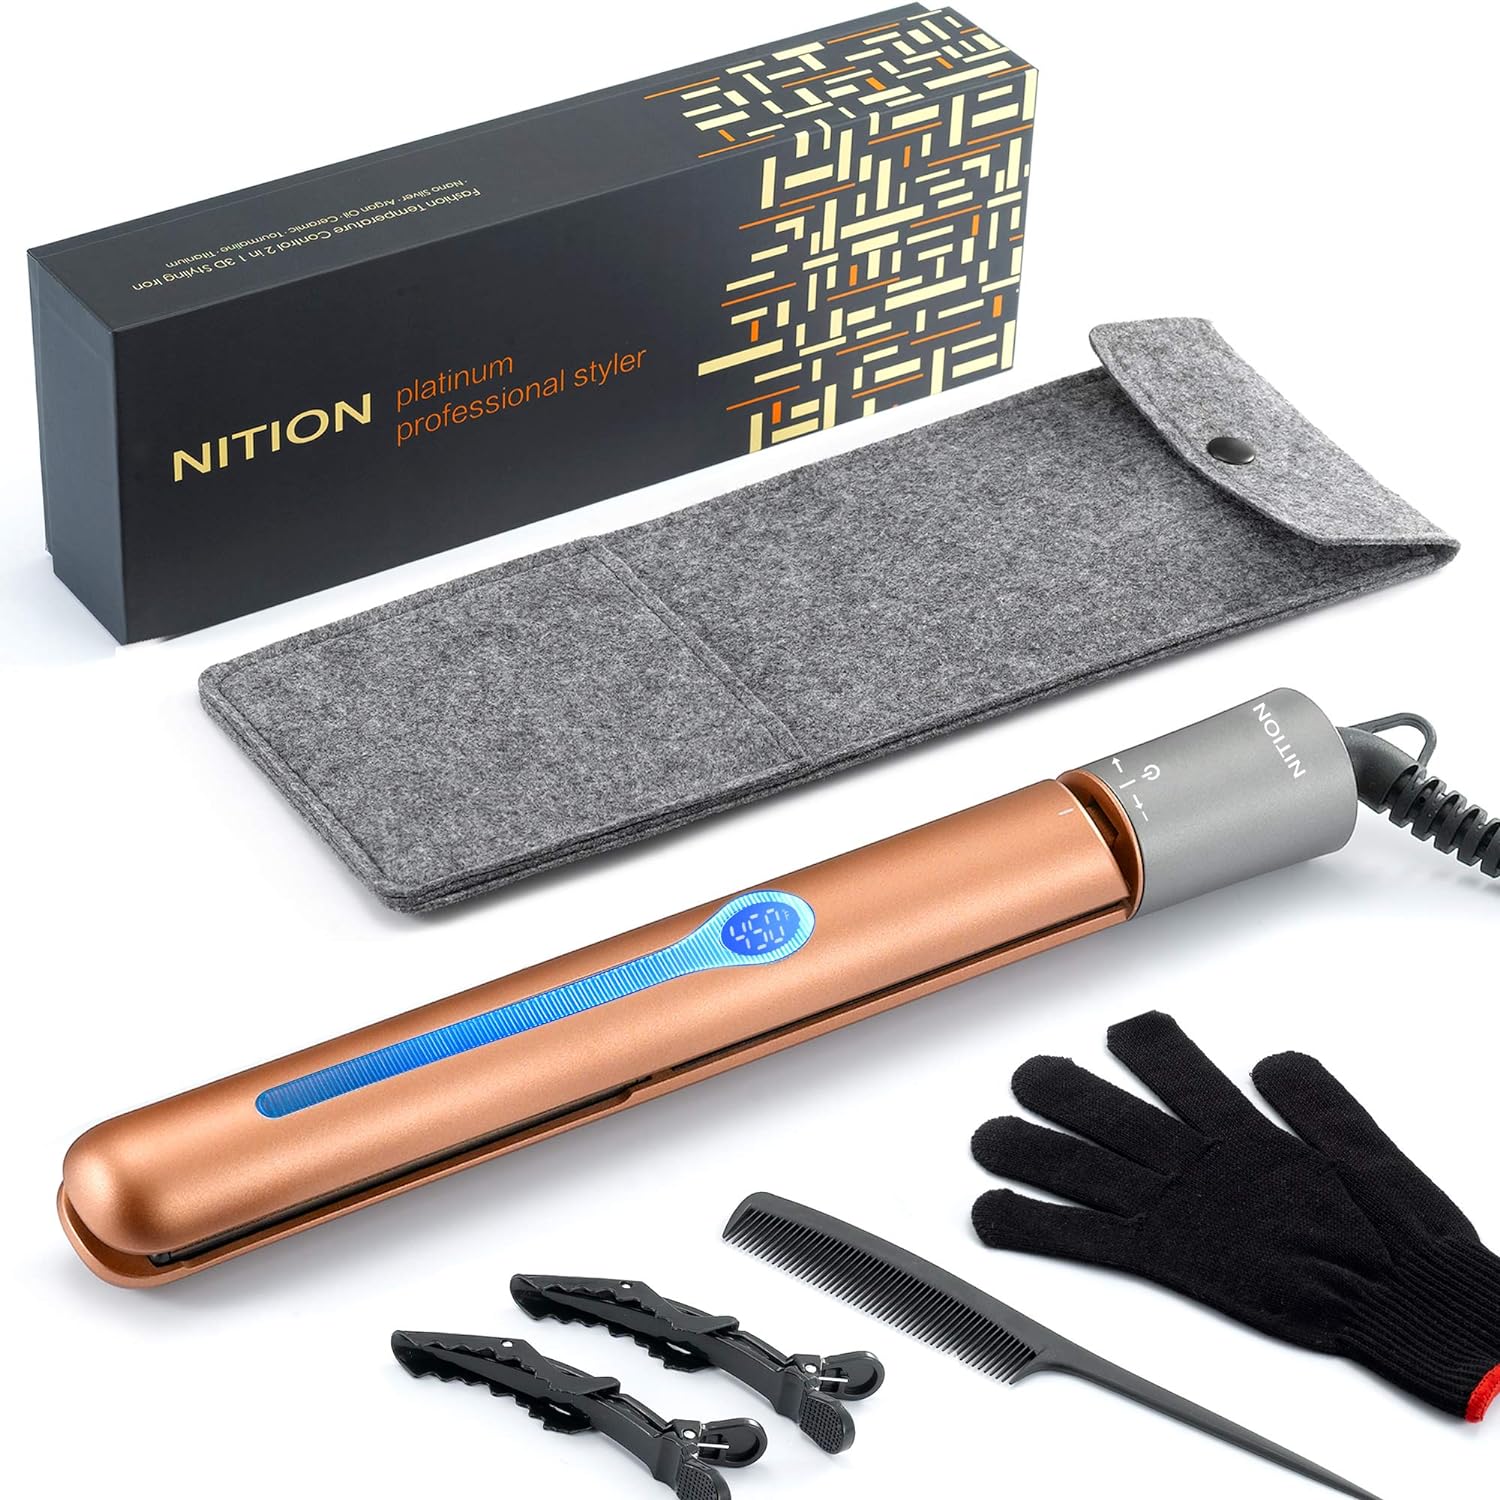 NITION Ceramic Tourmaline Flat Iron for Hair LCD Hair Straighteners MCH Fast Straightening. Healthy Styling 265-450°F 6-Temps Adjustable for All Hair Type. 2-in-1 Curling Iron. 1" Heating Plate. Gold